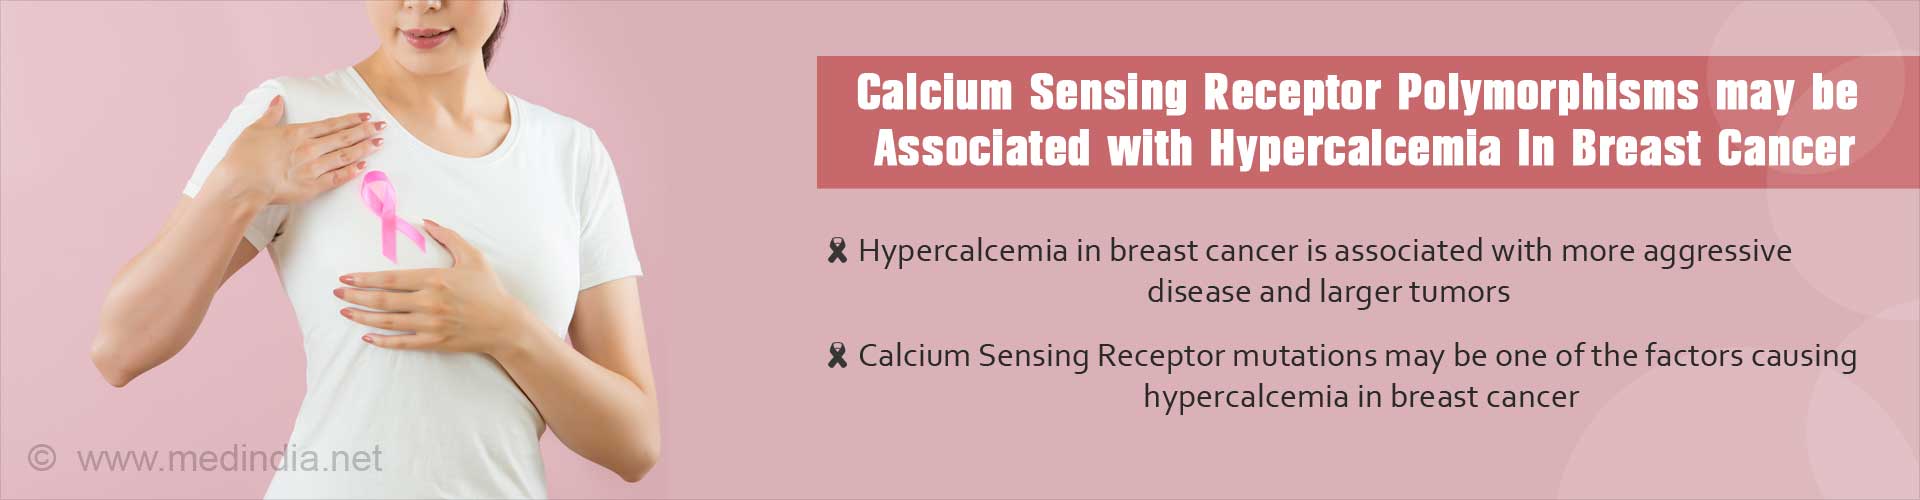 Calcium sensing receptor polymorphisms may be associated with hypercalcemia in breast cancer
- Hypercalcemia in breast cancer is associated with more aggressive disease and larger tumors
- Calcium sensing receptor mutations may be one of the factors causing hypercalcemia in breast cancer